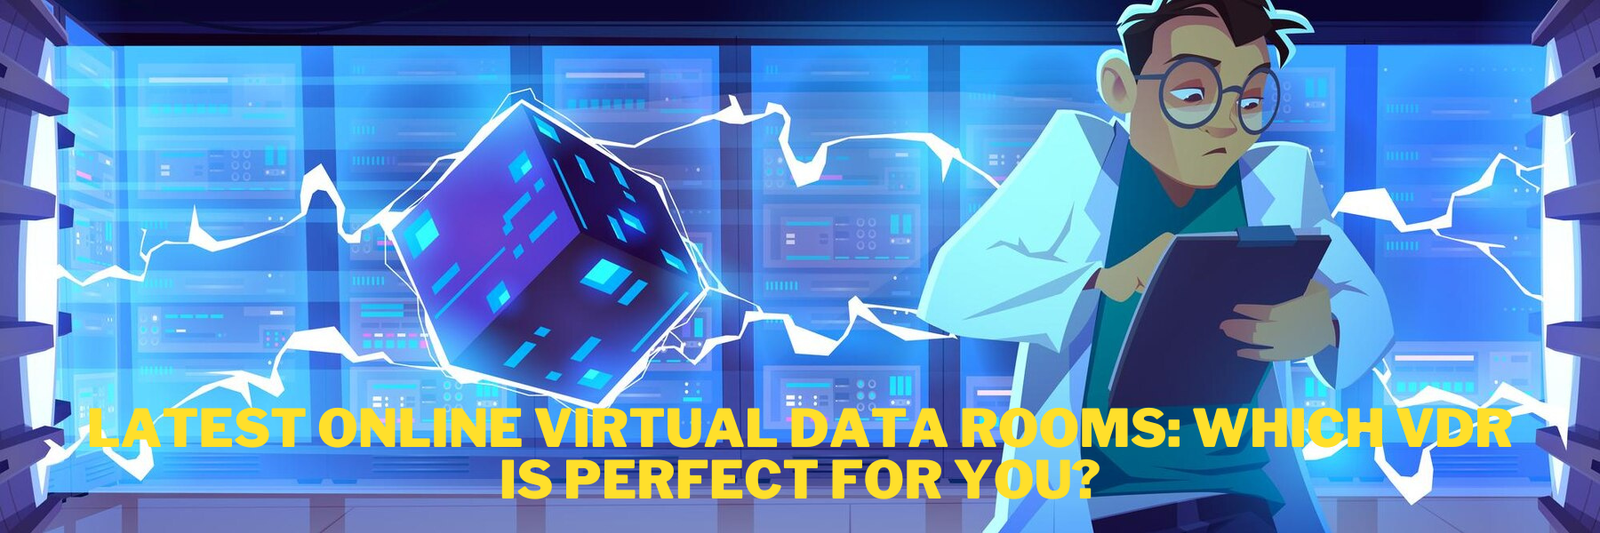 Comparison of Latest Online Virtual Data Rooms for Secure Data Management